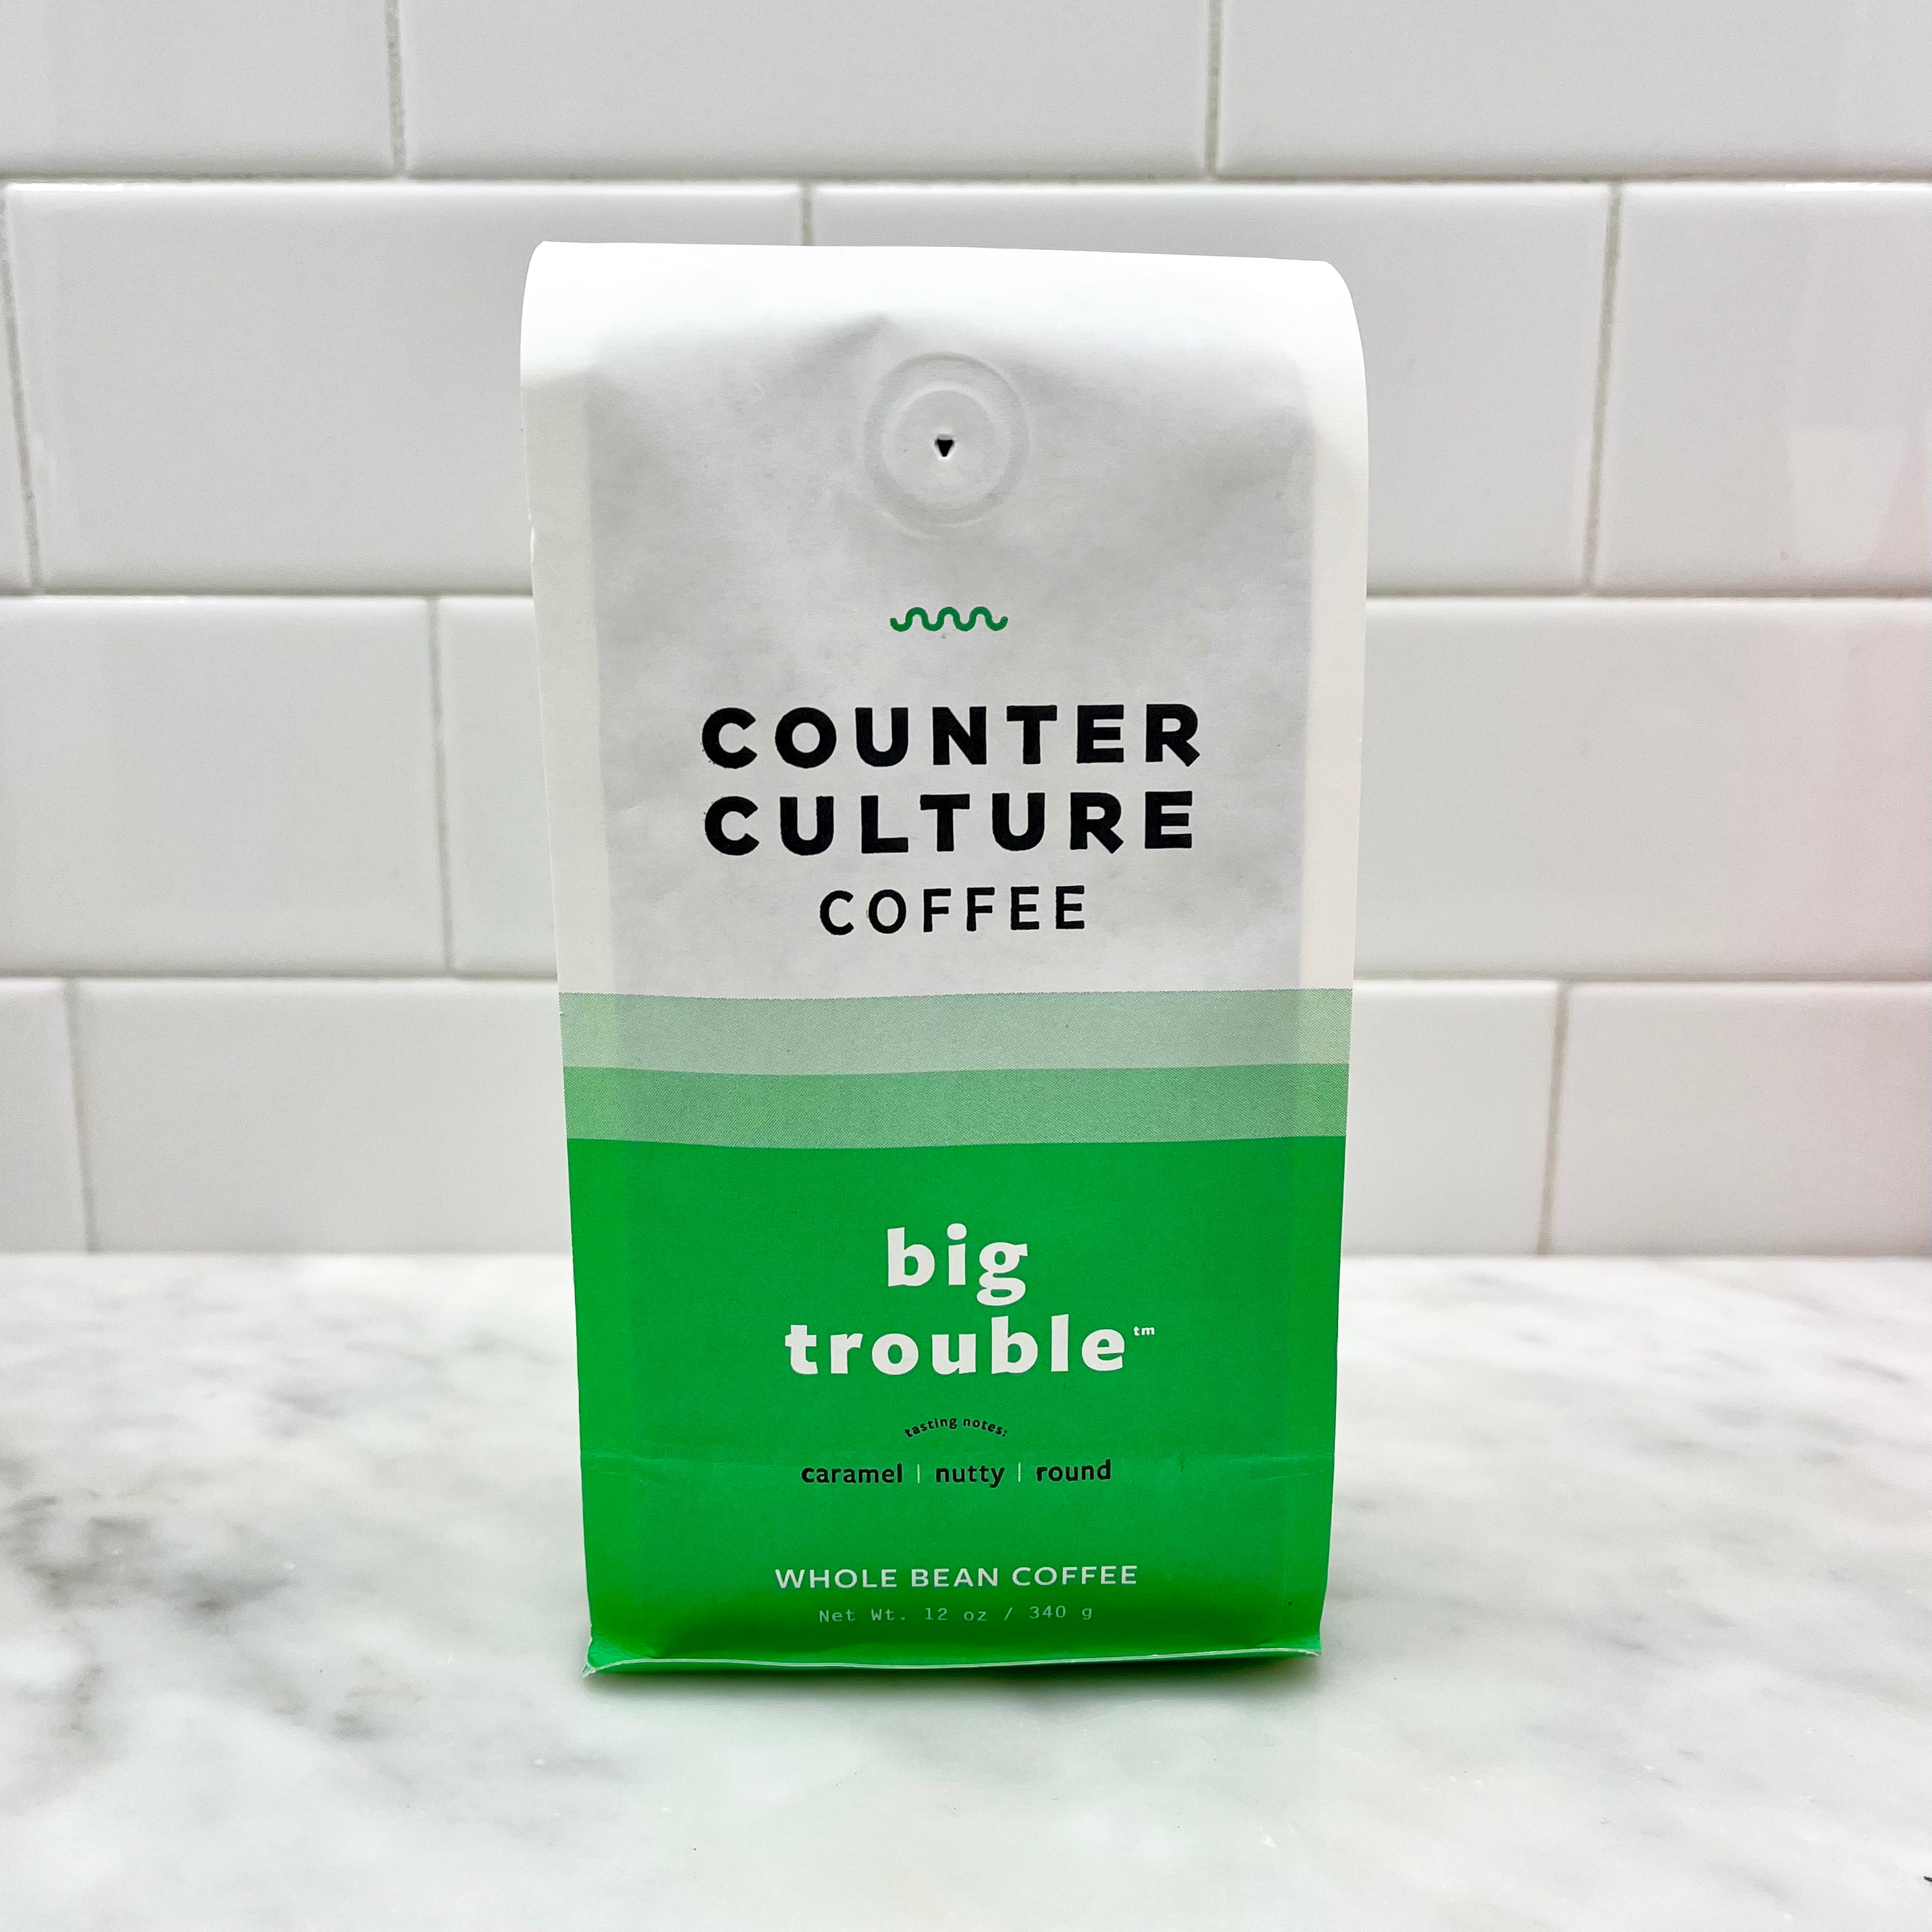 A bag of Counter Culture Coffee on a countertop.